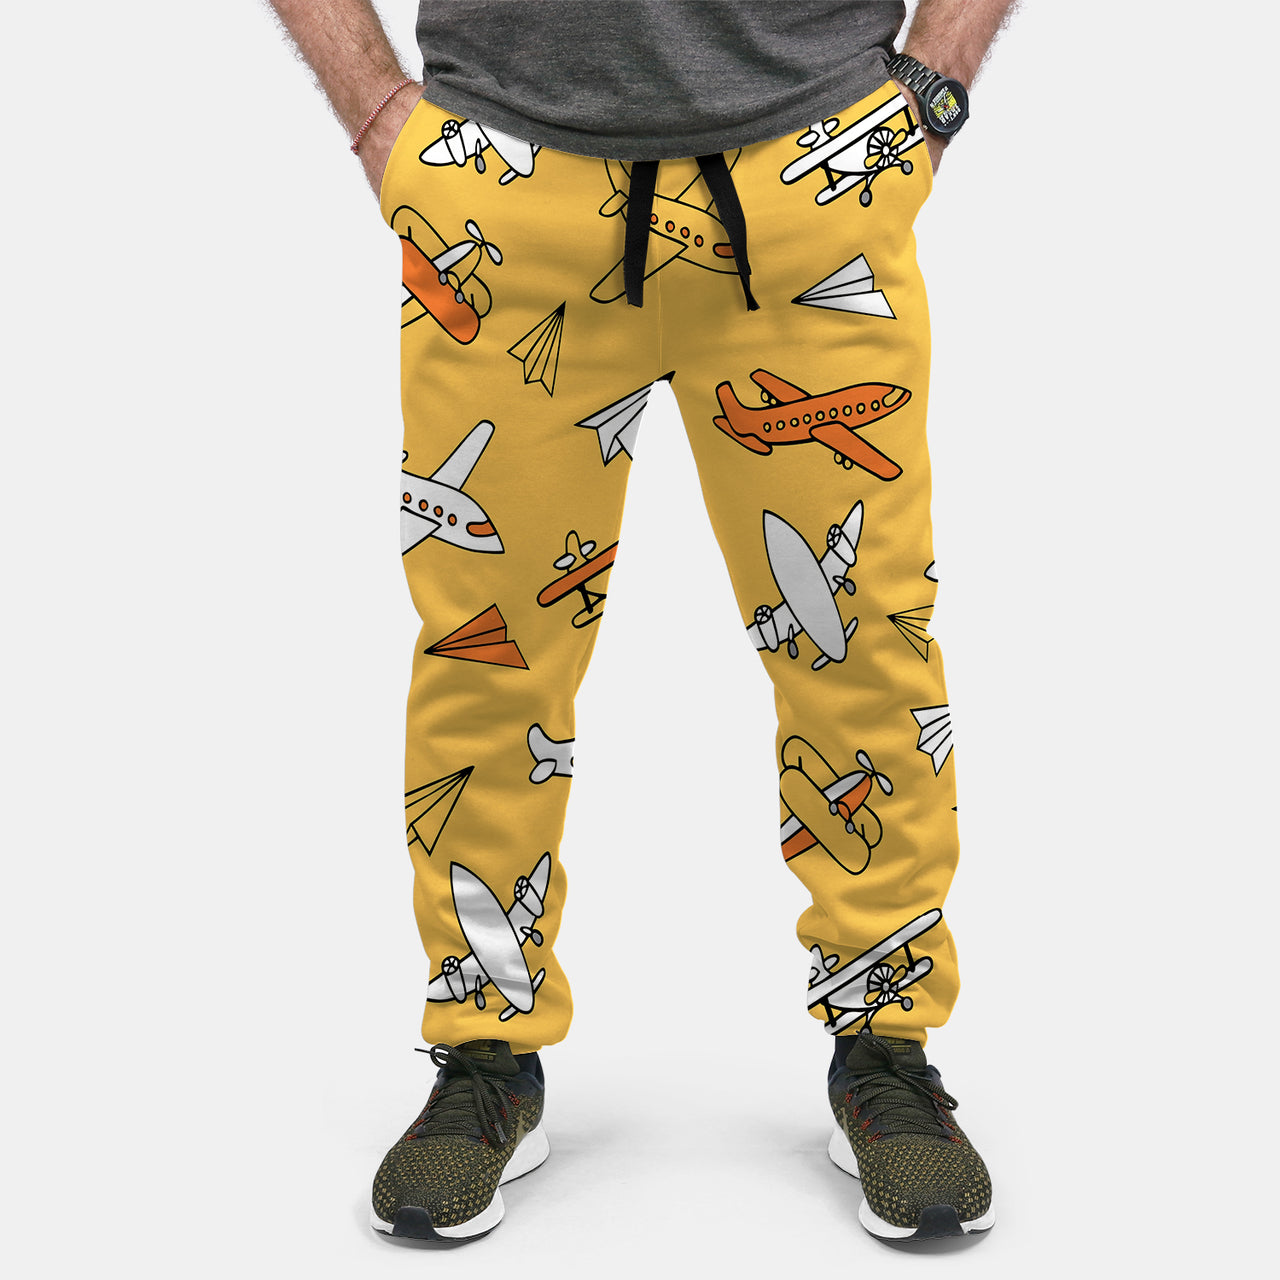 Super Drawings of Airplanes Designed Sweat Pants & Trousers